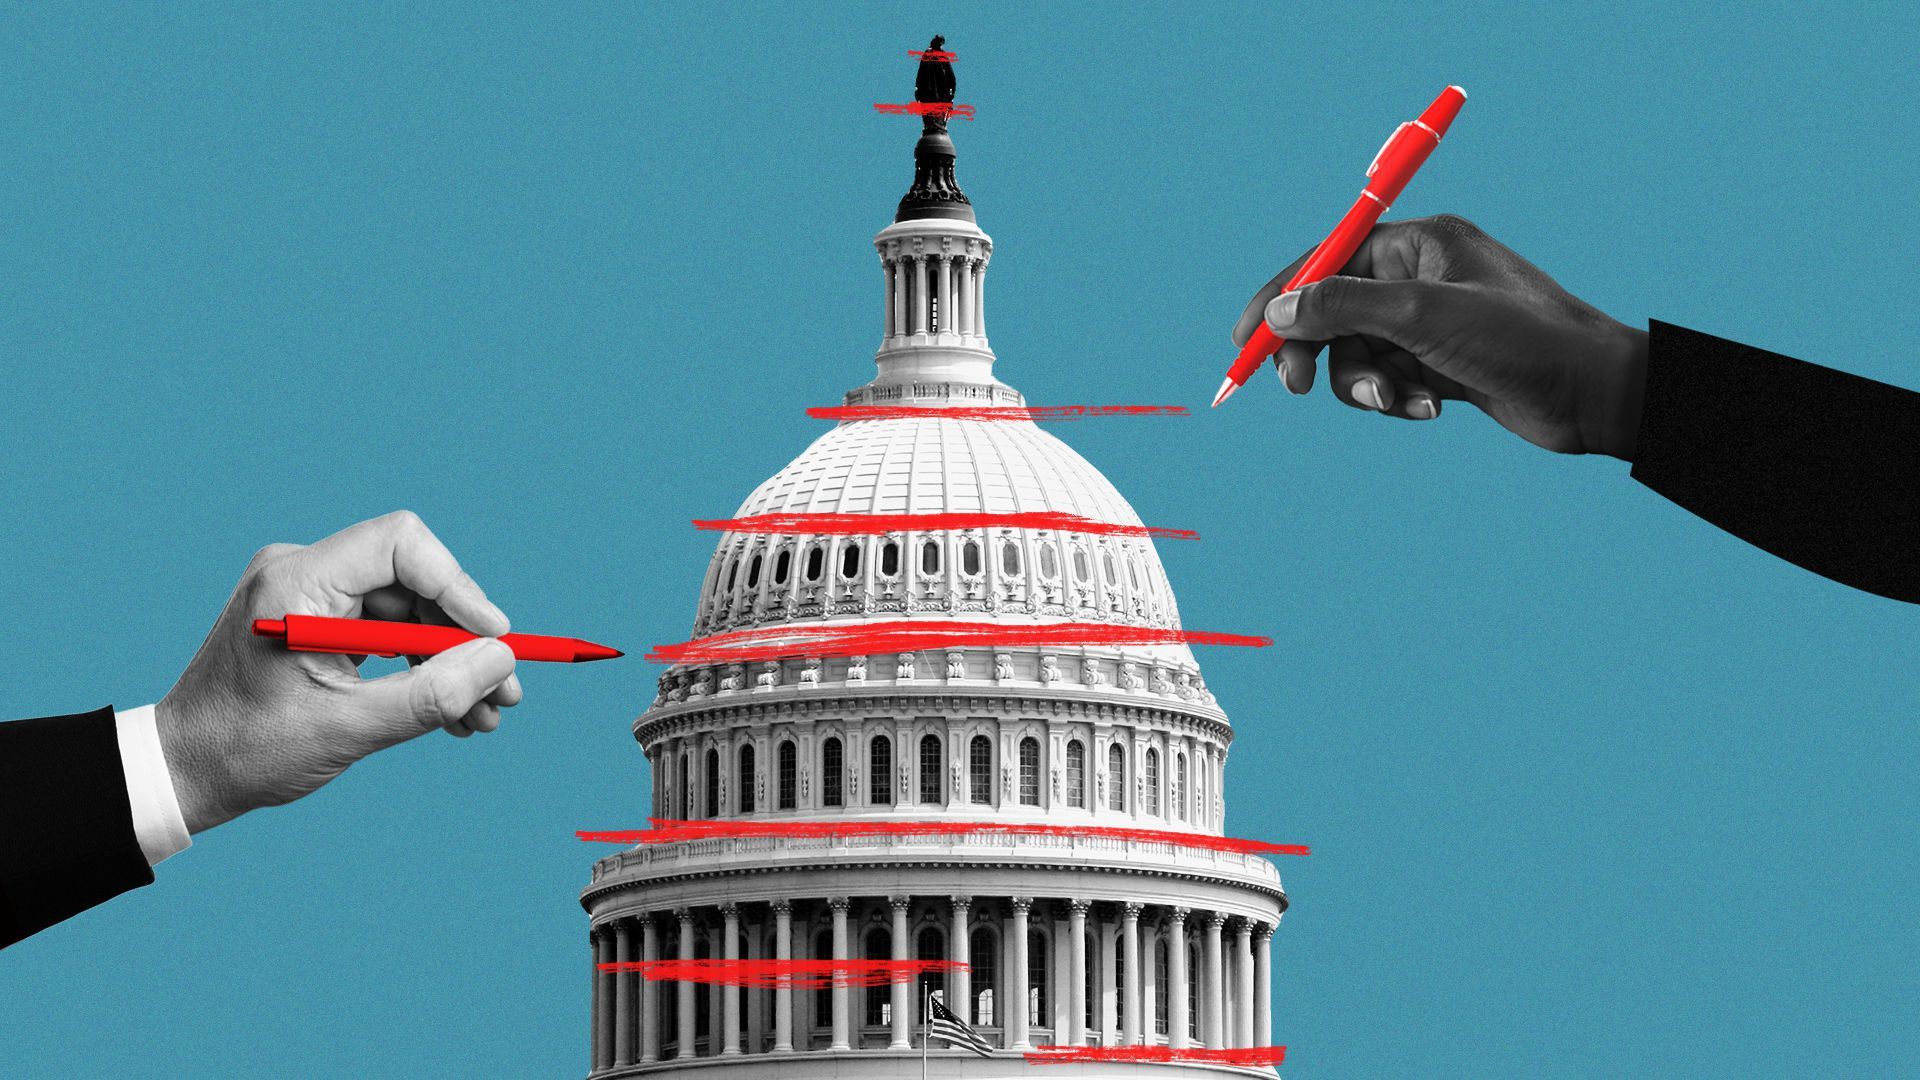 An illustration shows hands drawing red lines across the U.S. Capitol Dome.